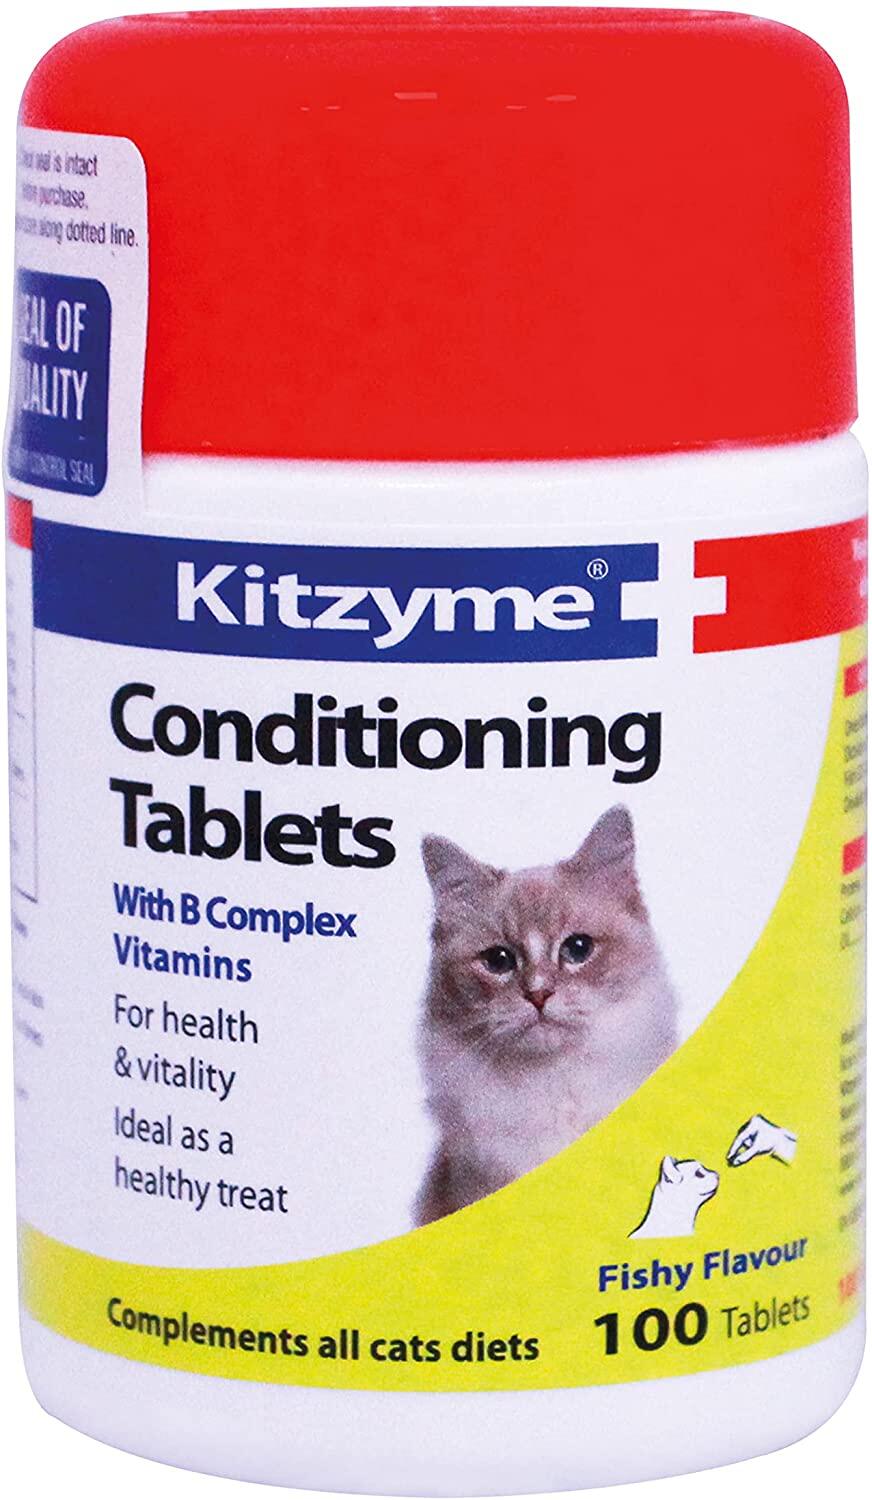 Kitzyme Conditioning Tablets for Cats and Kittens cat vitamin kucing supplement health vitality appetite energetic improve immune system